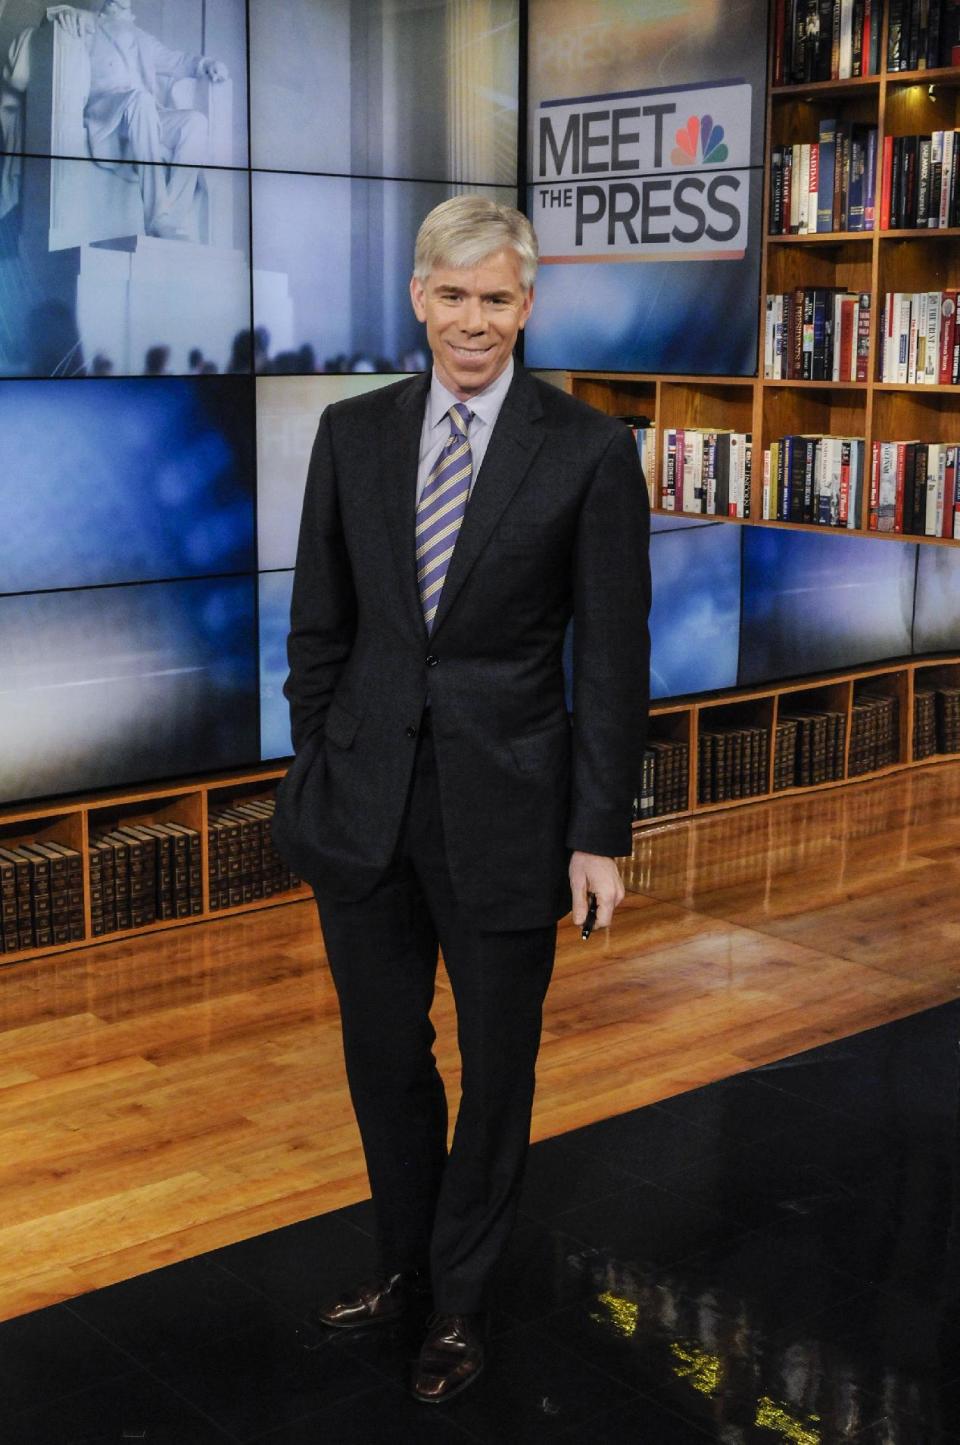 This Feb. 24, 2013 photo released by NBC News shows moderator David Gregory on the set of "Meet the Press," in Washington. The 42-year-old Gregory was named "Meet the Press" moderator in December 2008 after serving as Chief White House correspondent during the presidency of George W. Bush. (AP Photo/NBC, William B. Plowman)